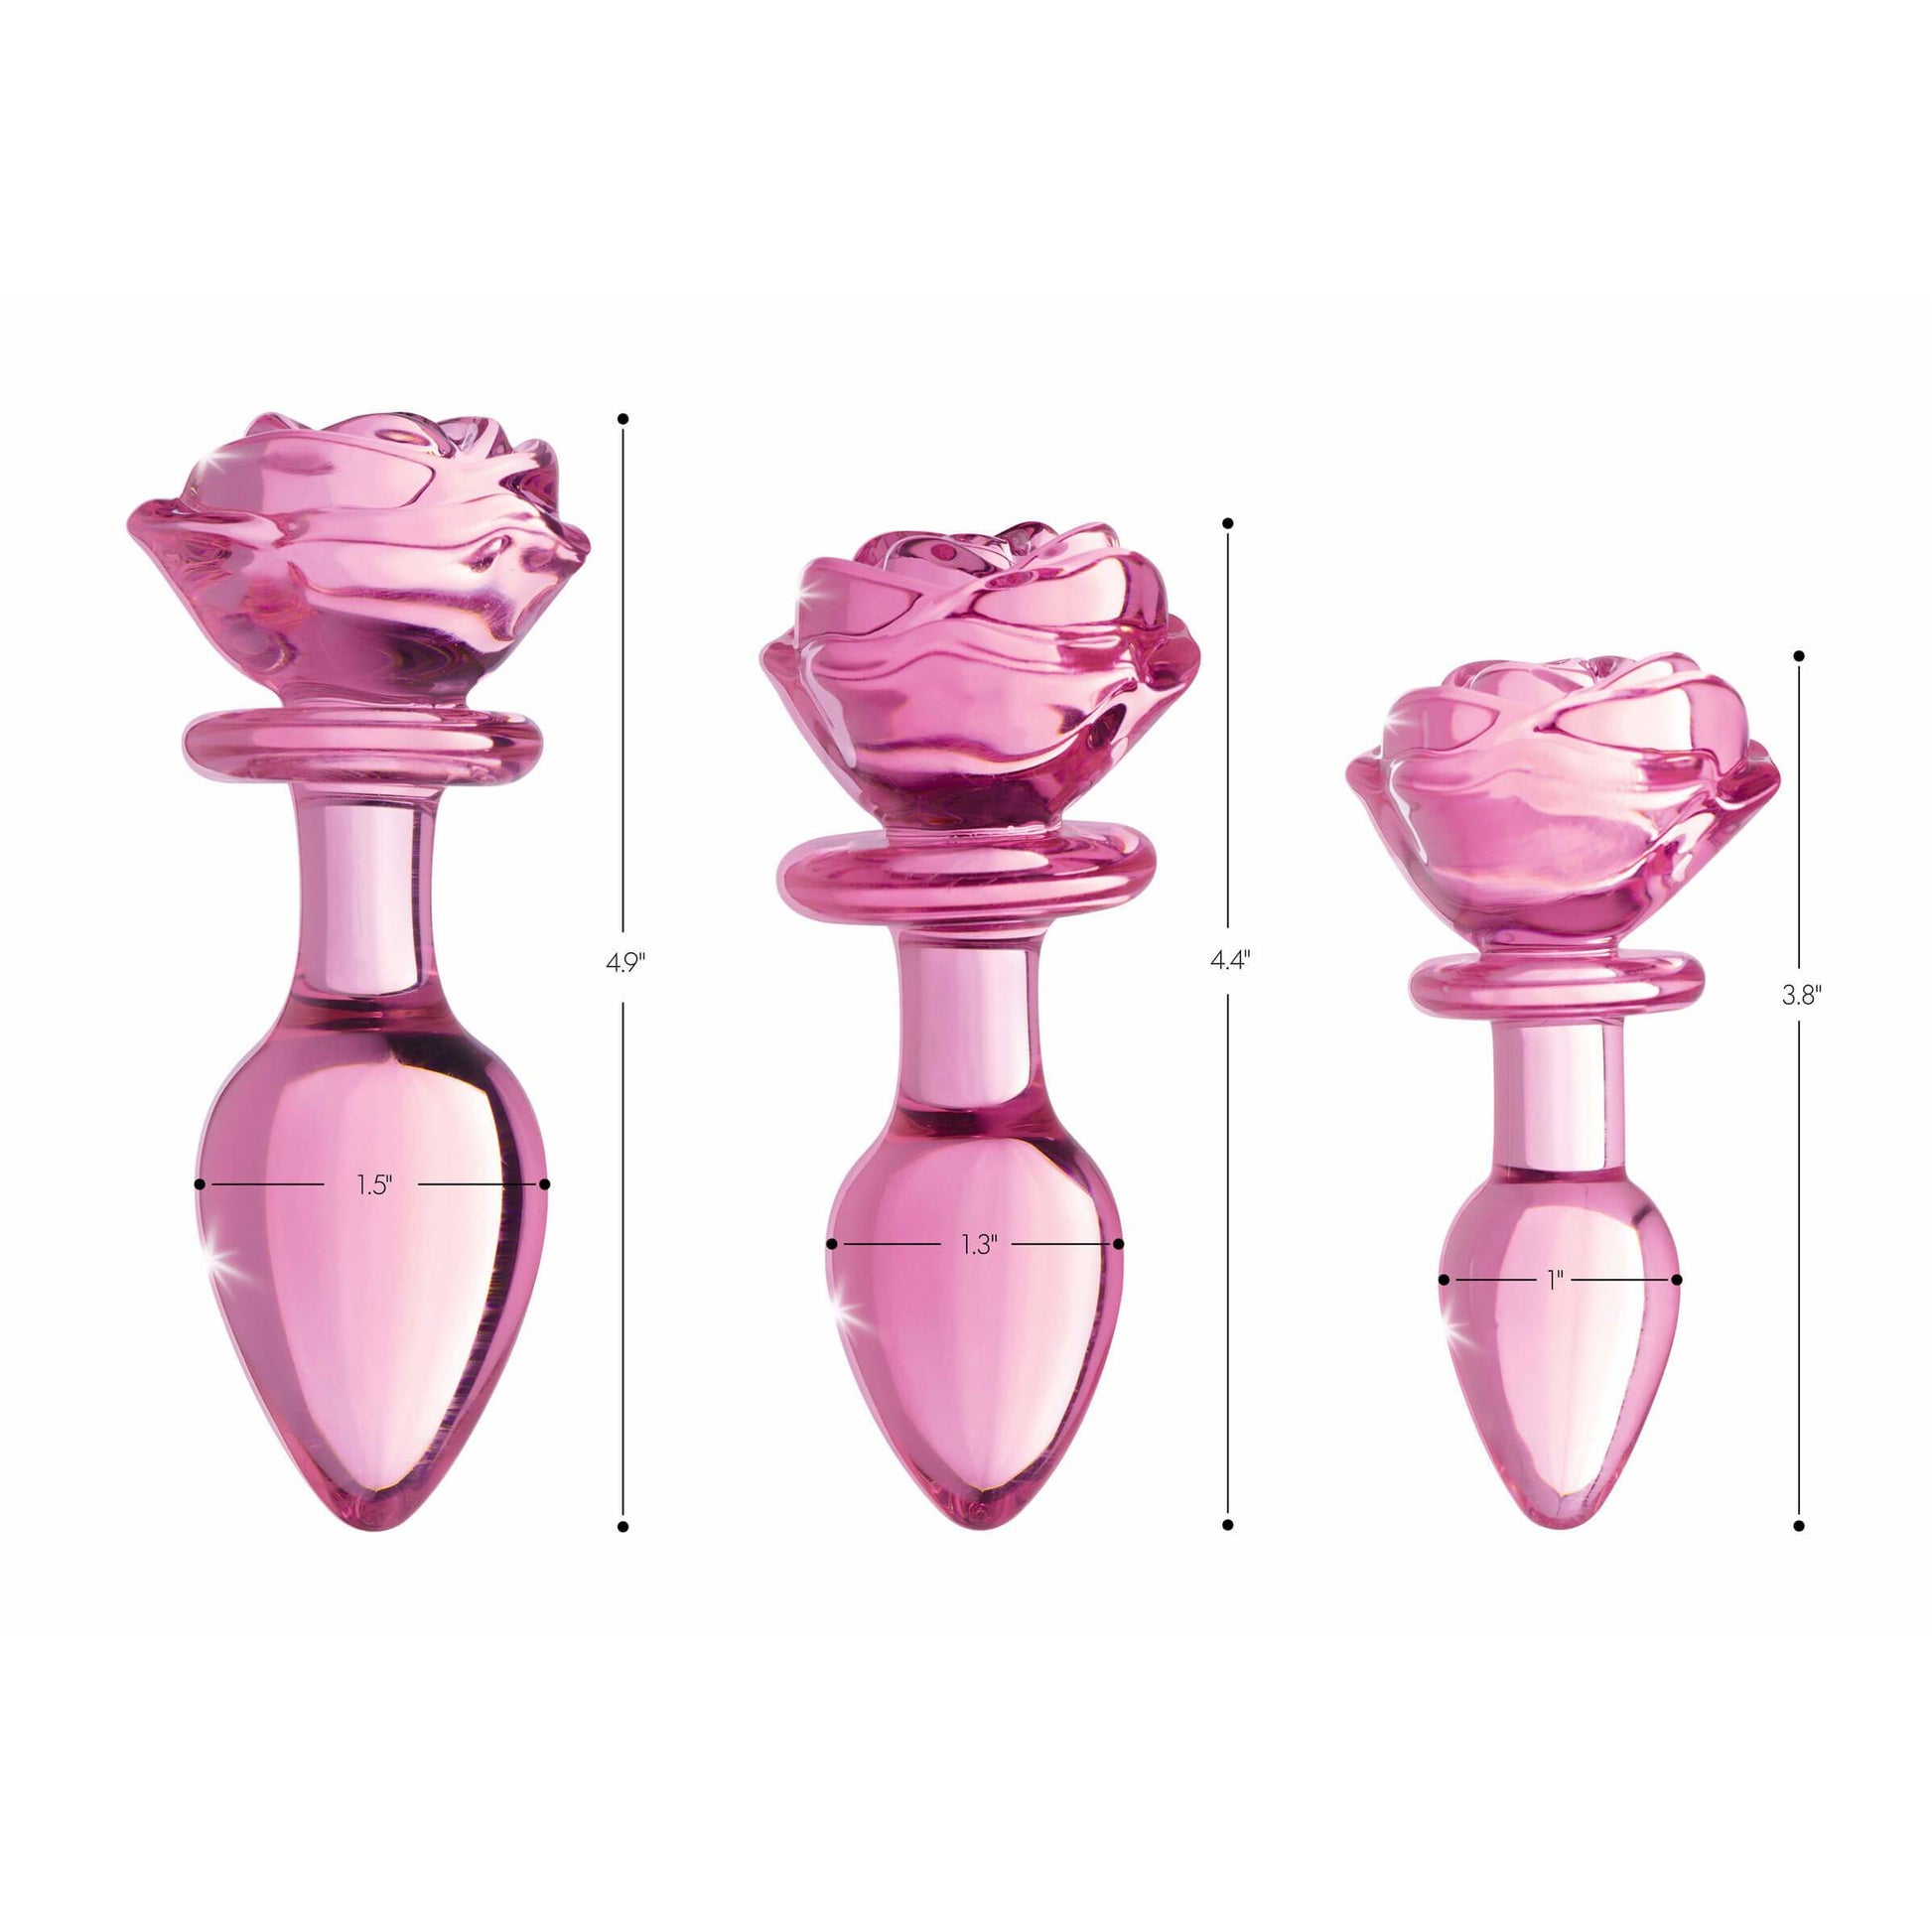 Booty Sparks Pink Rose Glass Anal Plug by The Bigger O - online sex toy shop USA, Canada & UK shipping available